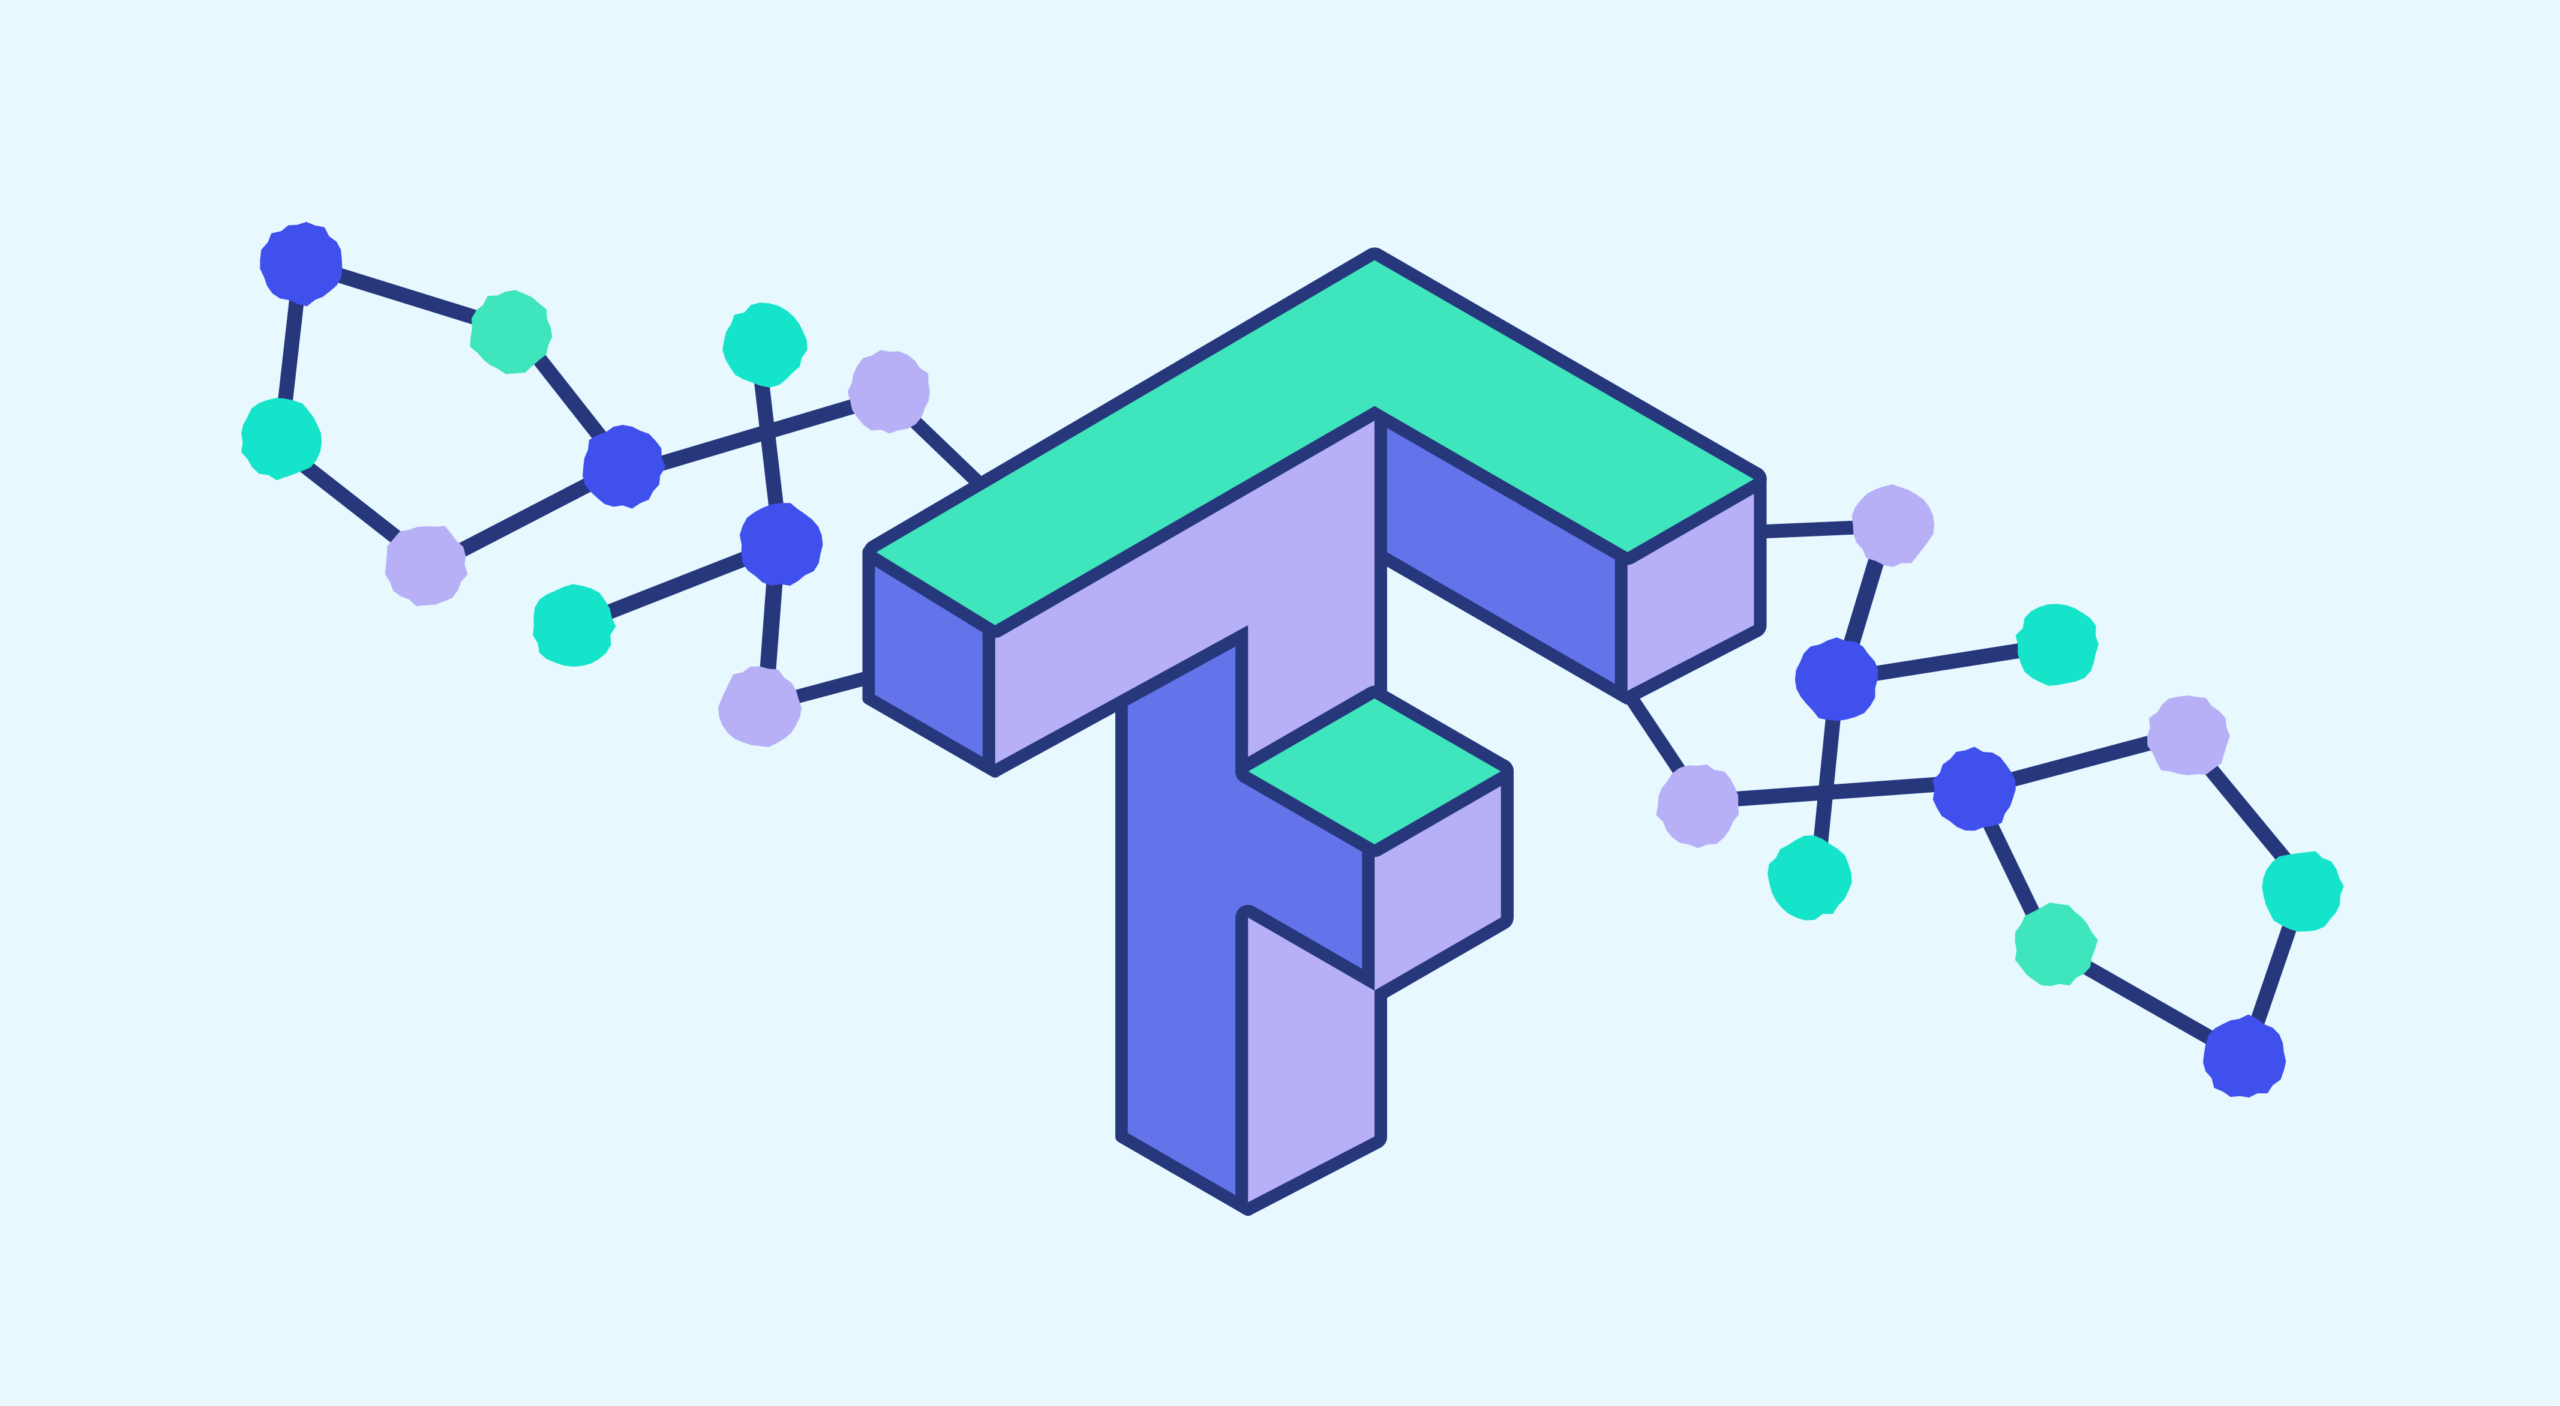 Tensor flow : All about Google’s Machine Learning framework